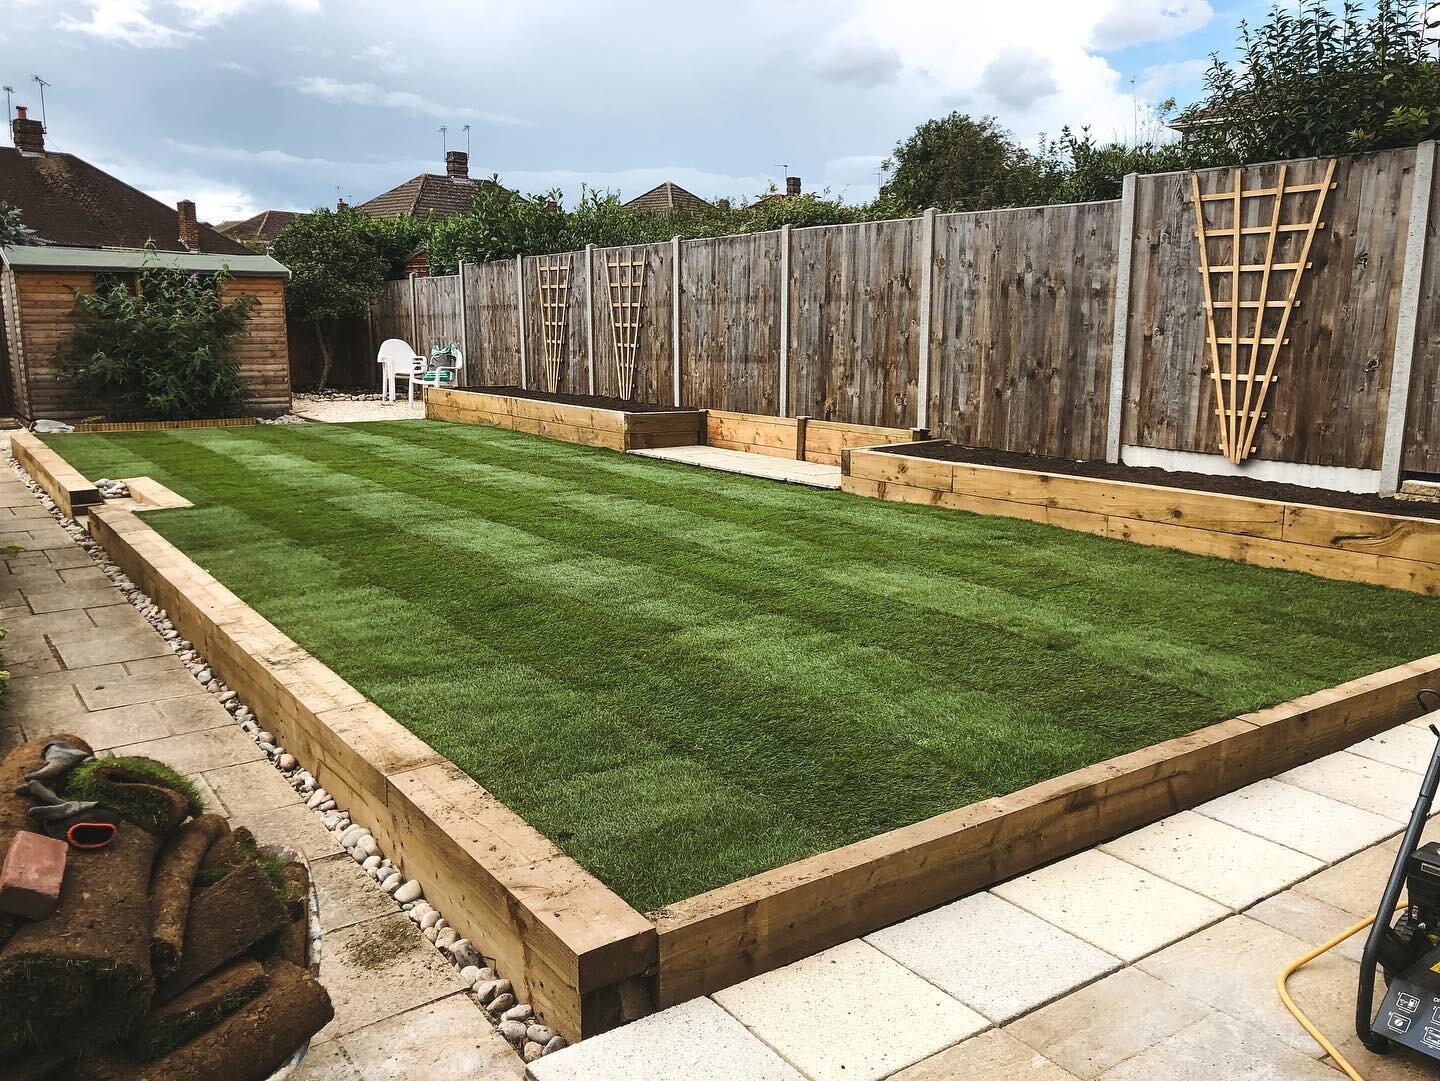 One of our latest projects was to create a low maintenance garden so we removed and replaced the old mesh fence, all the old brick walls were taken out and were replaced with modern sleeper walls with steps leading up to the new lawn. We included 2 l